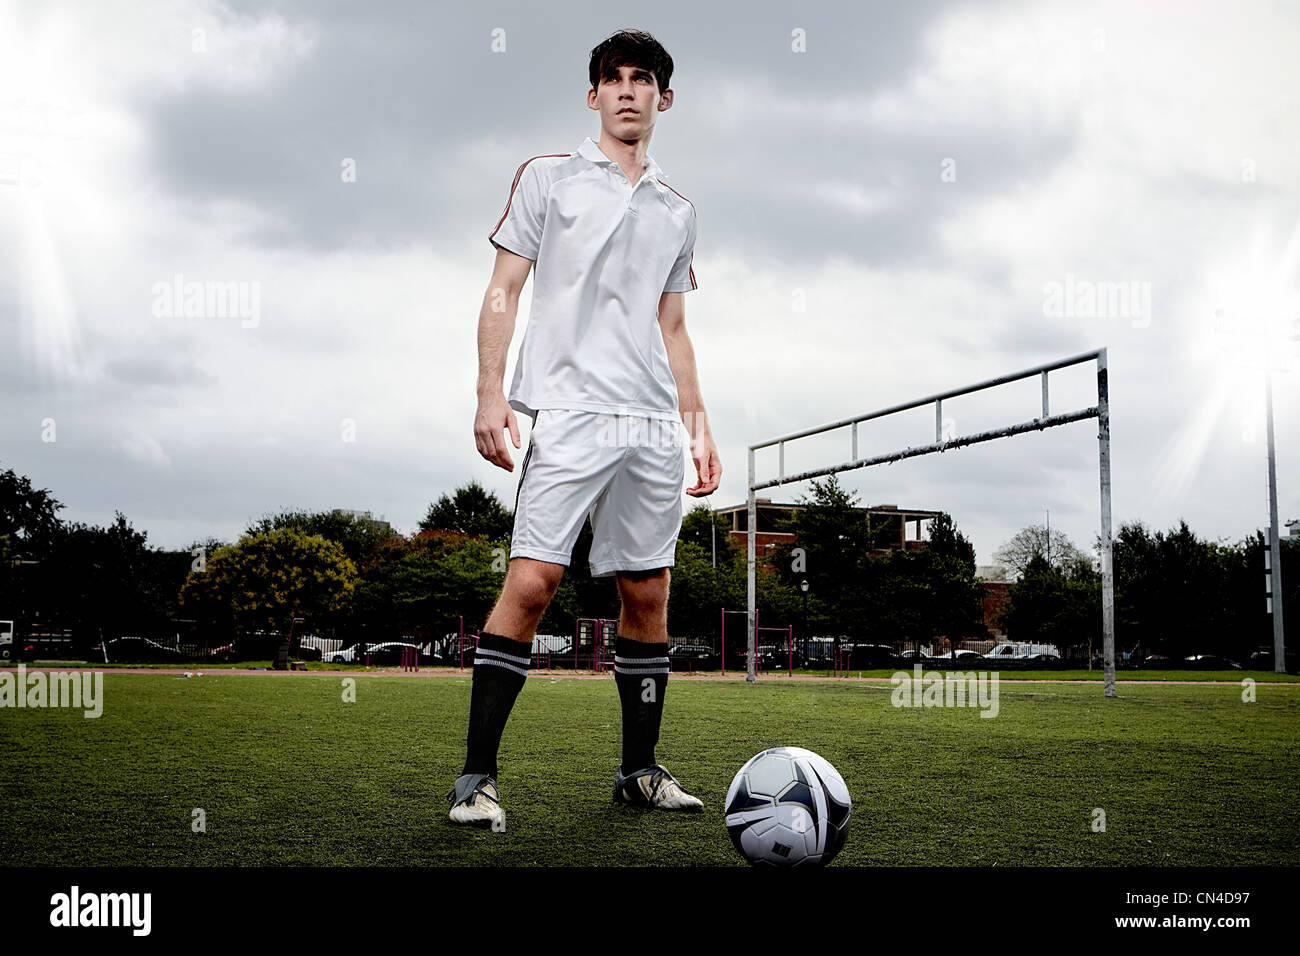 Soccer player standing on pitch Stock Photo